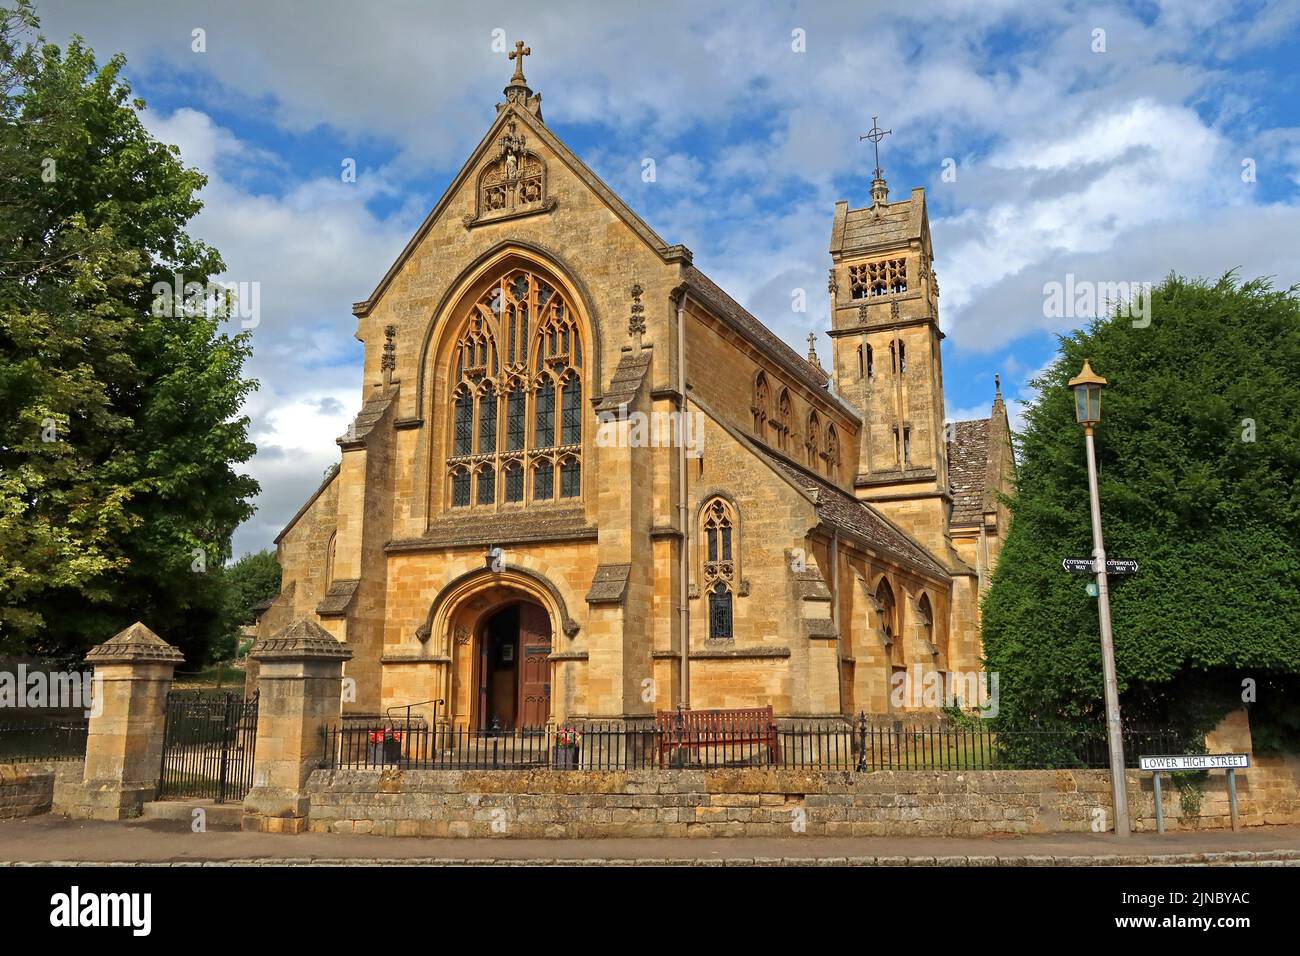 St Catharine's Church - Lower High St,, Chipping Campden, Cotswolds, Gloucestershire, England, UK, GL55 6AT Stock Photo